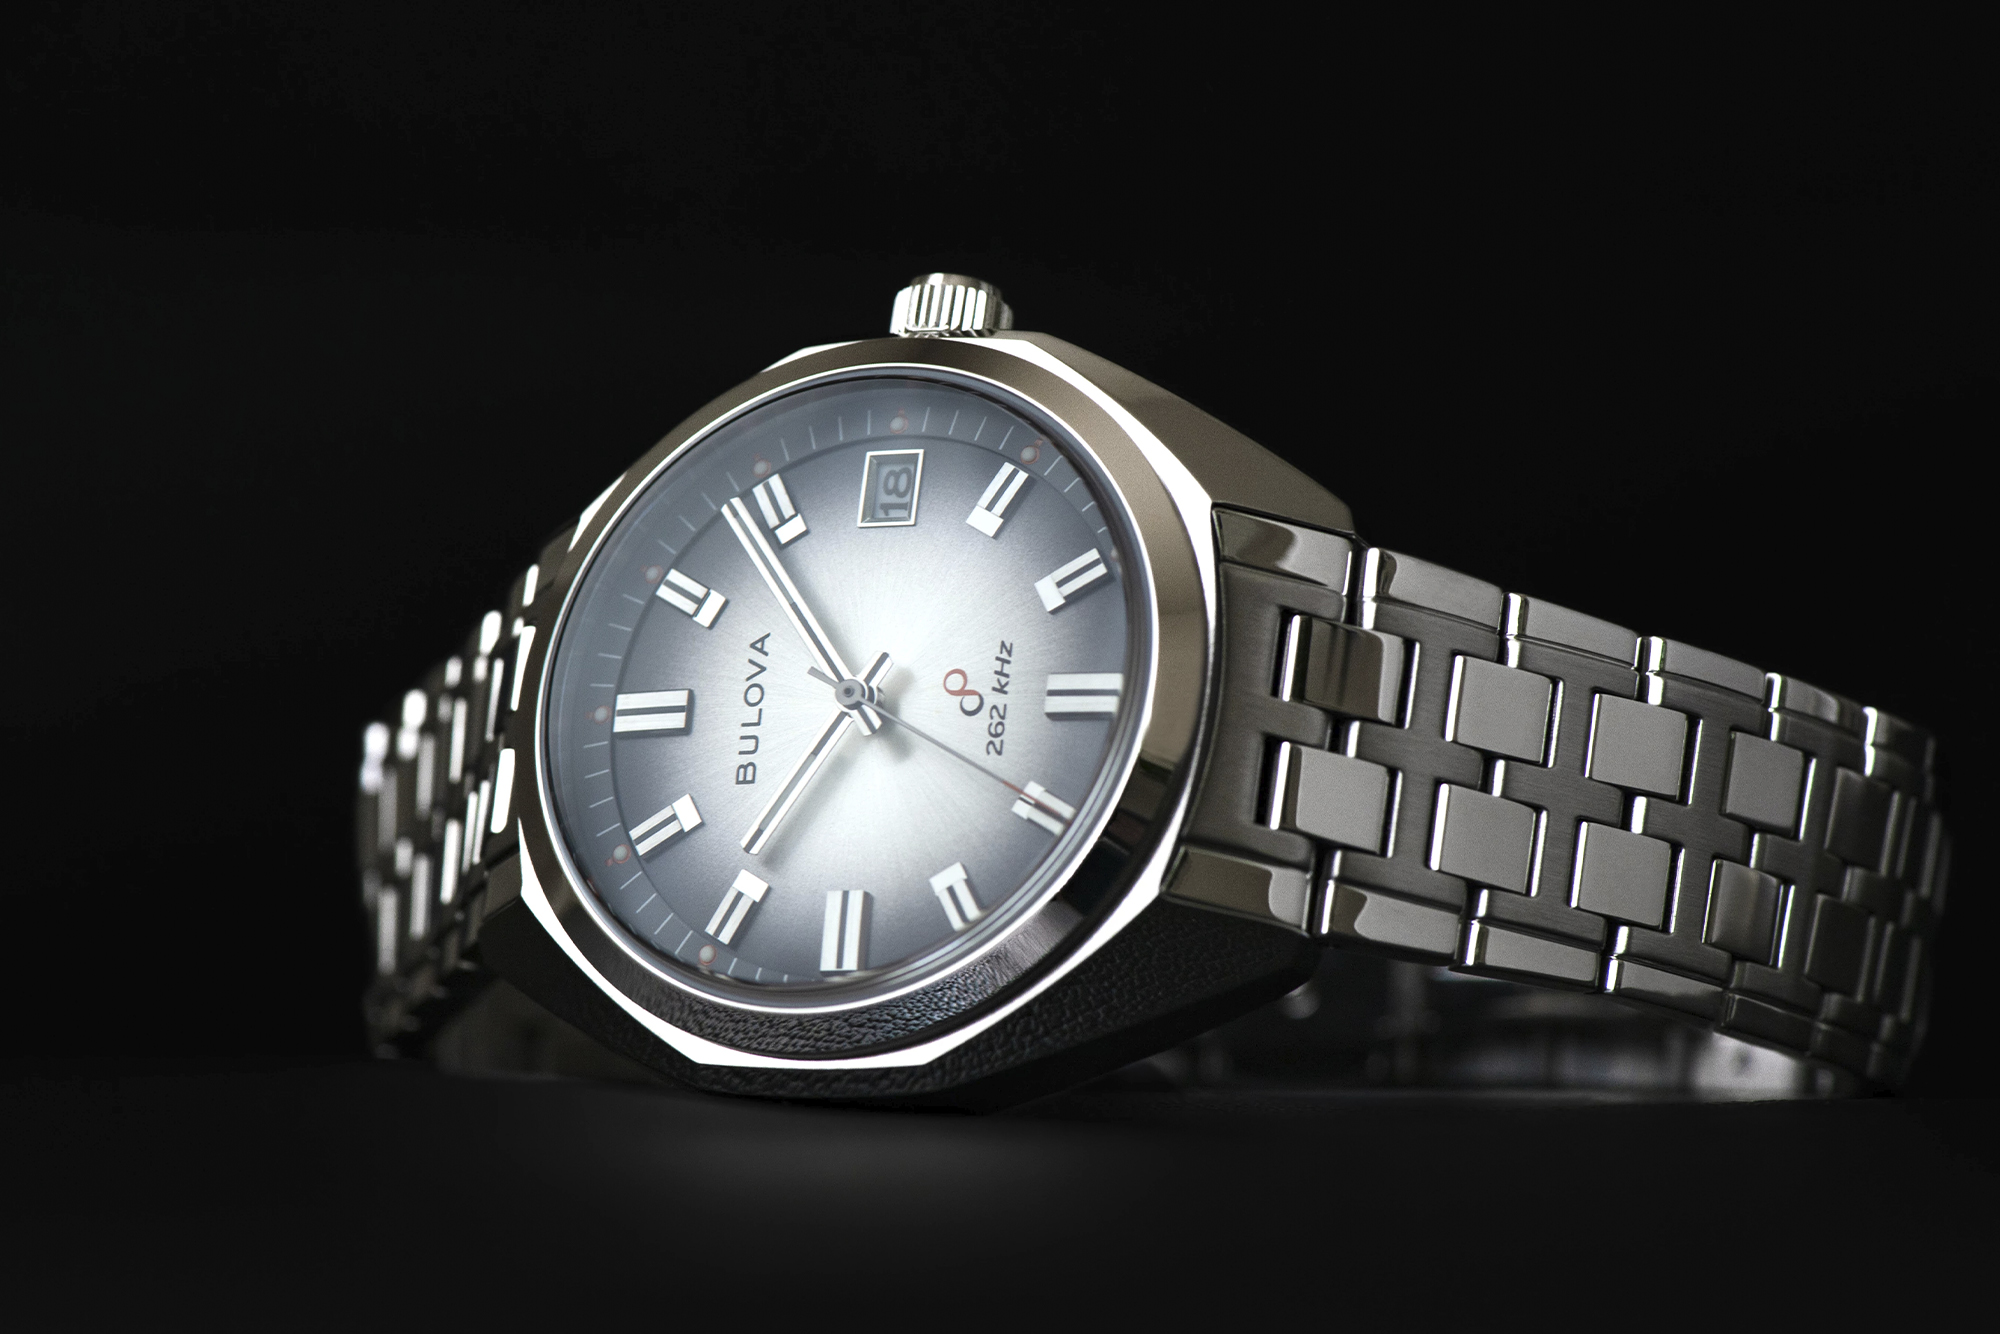 bulova and complecto watch shot with black background